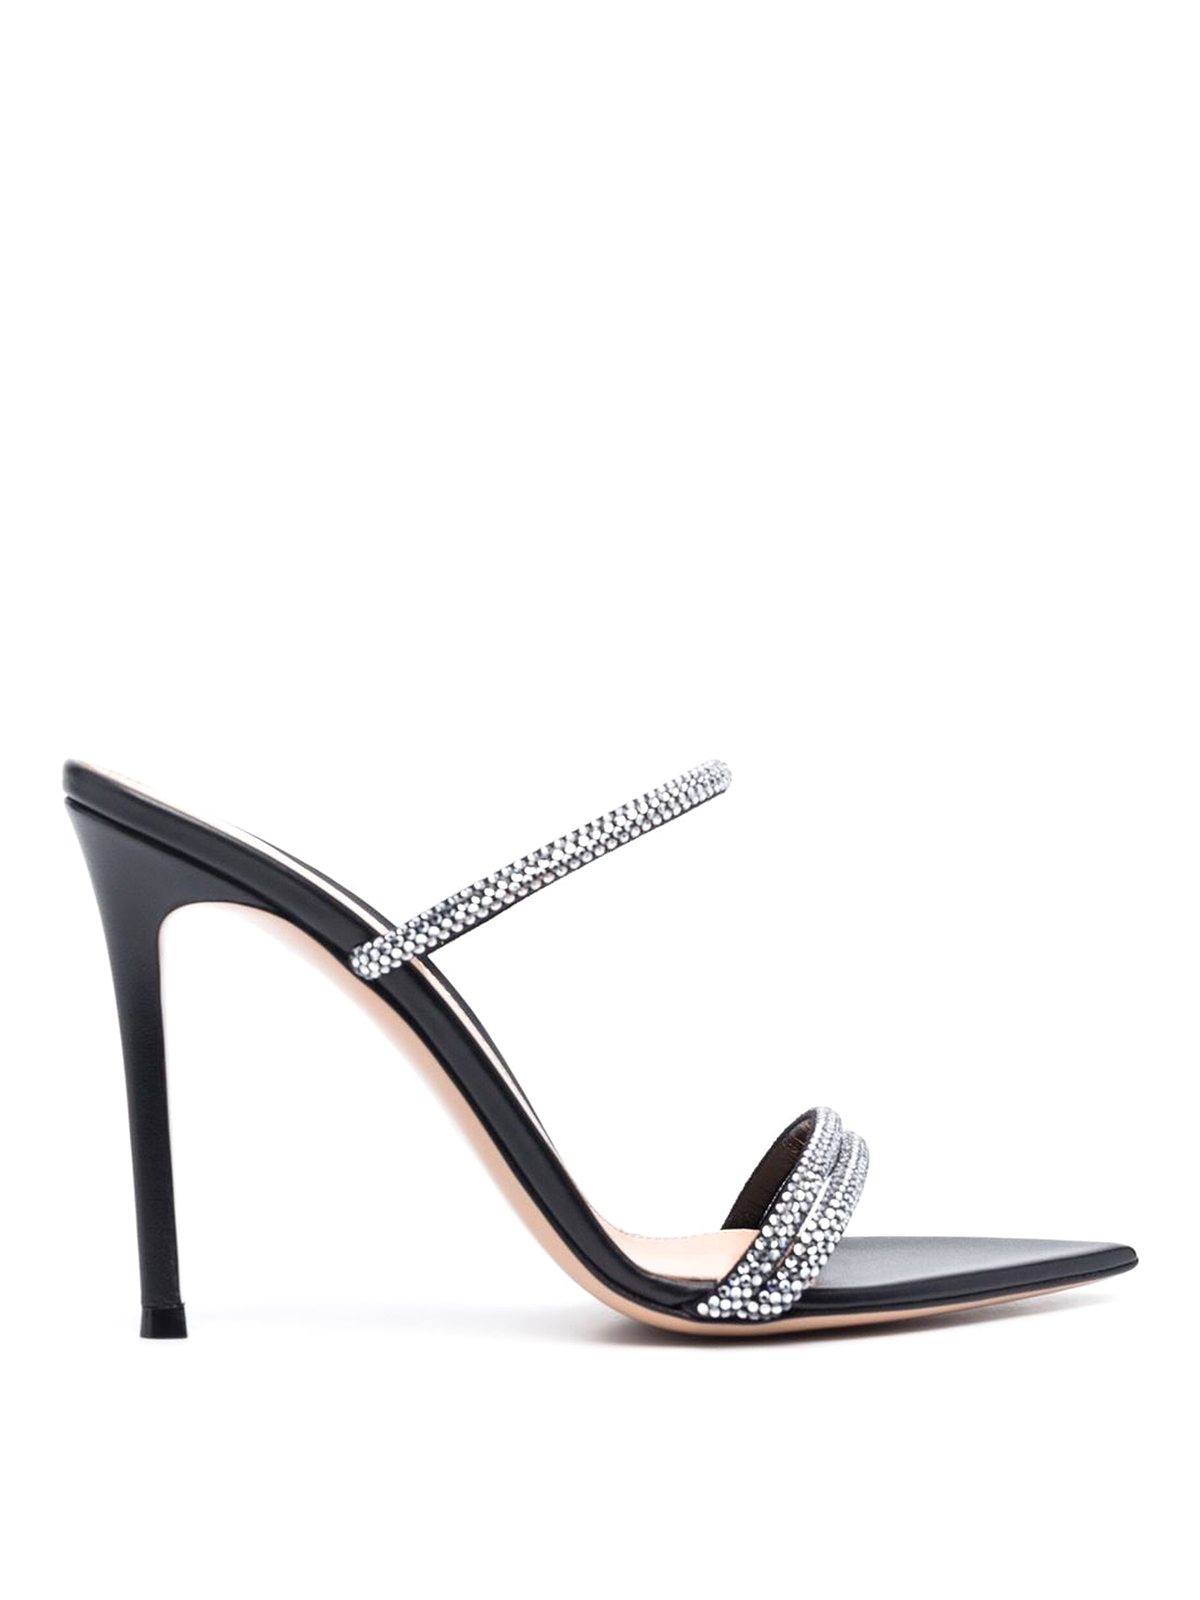 Shop Gianvito Rossi Leather Sandals With Crystal Embellishment In Black